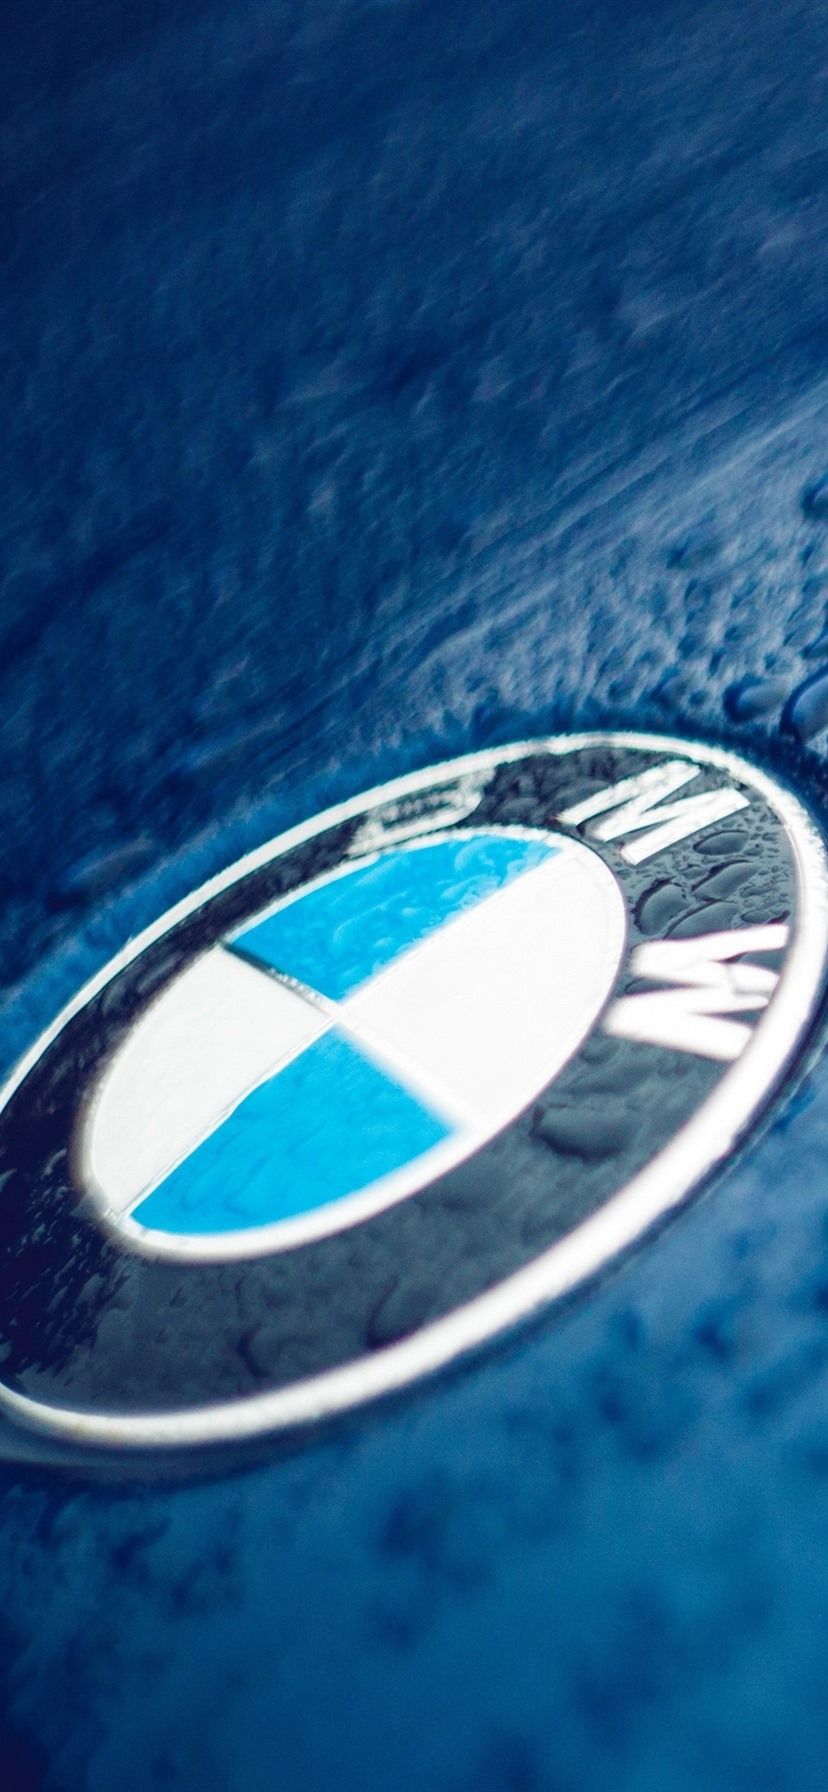 BMW Logo, Water Droplets 1080x1920 IPhone 8 7 6 6S Plus Wallpaper